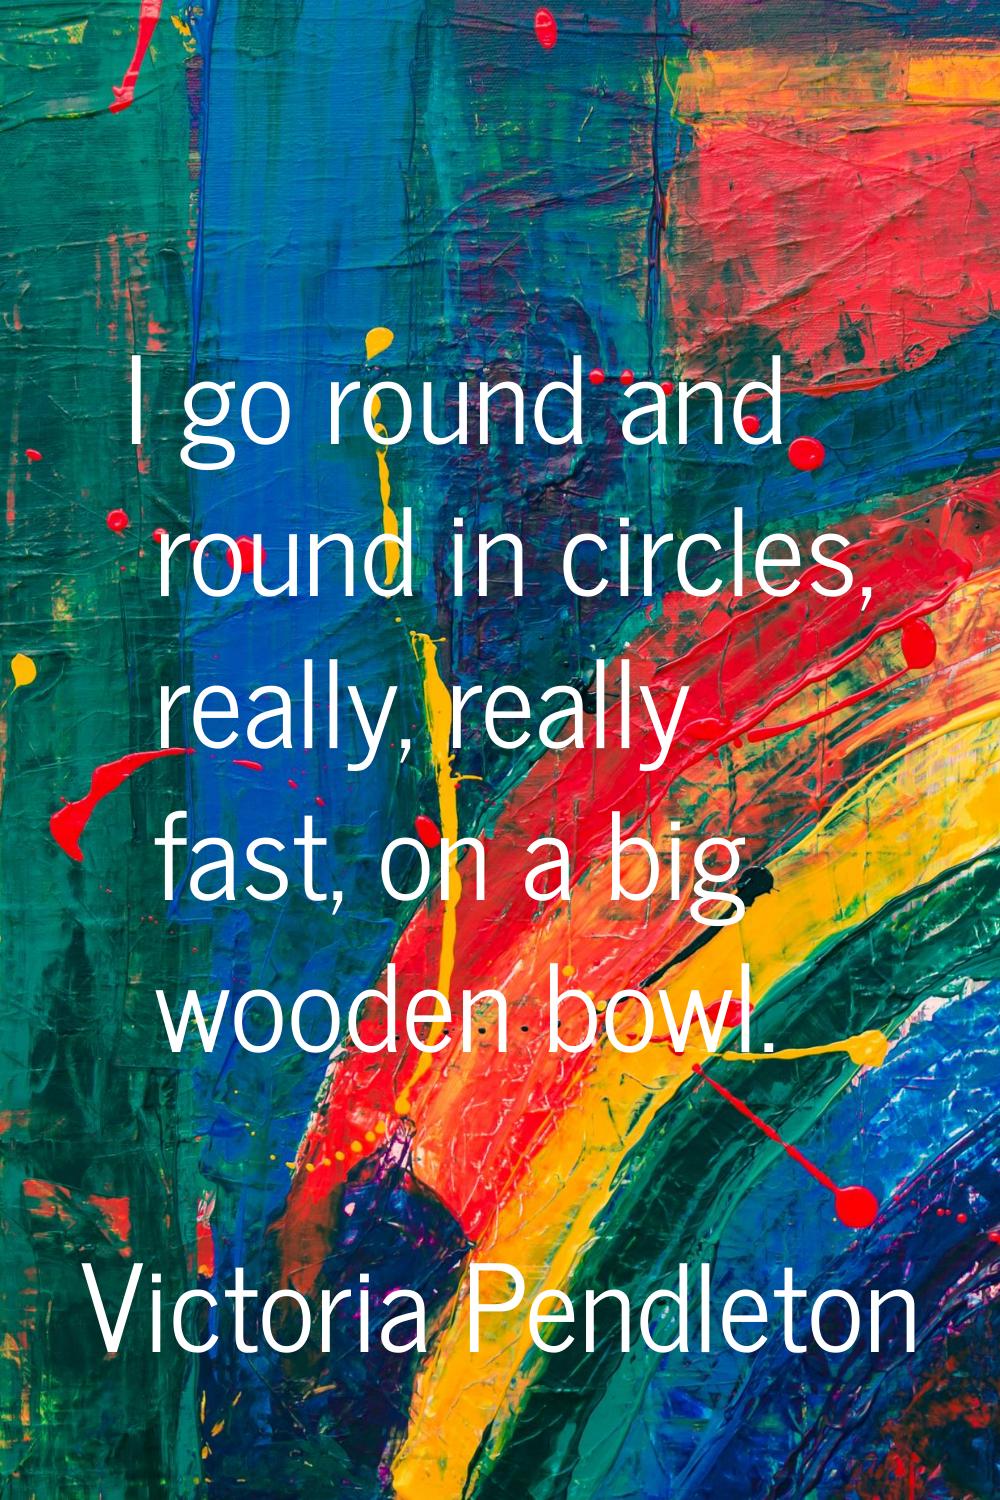 I go round and round in circles, really, really fast, on a big wooden bowl.